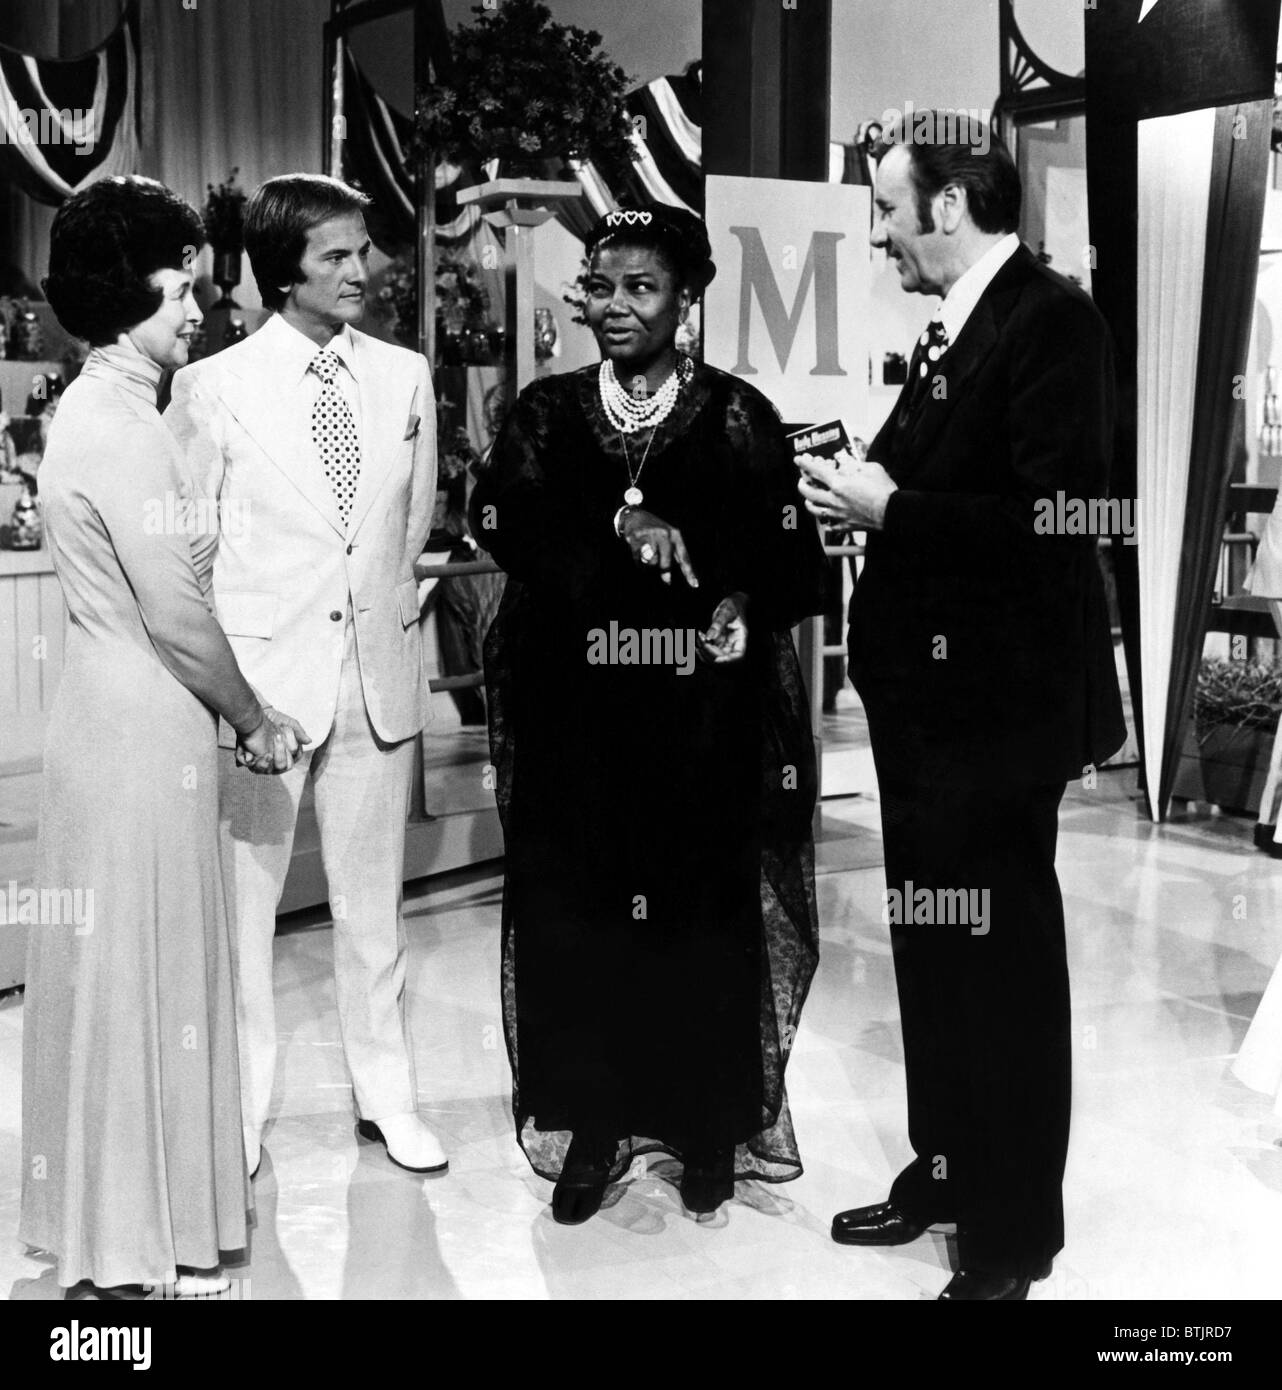 Evelyn Roberts, Pat Boone, Pearl Bailey, Oral Roberts, im Fernsehen Programm "Sommer 74", 1974. Stockfoto